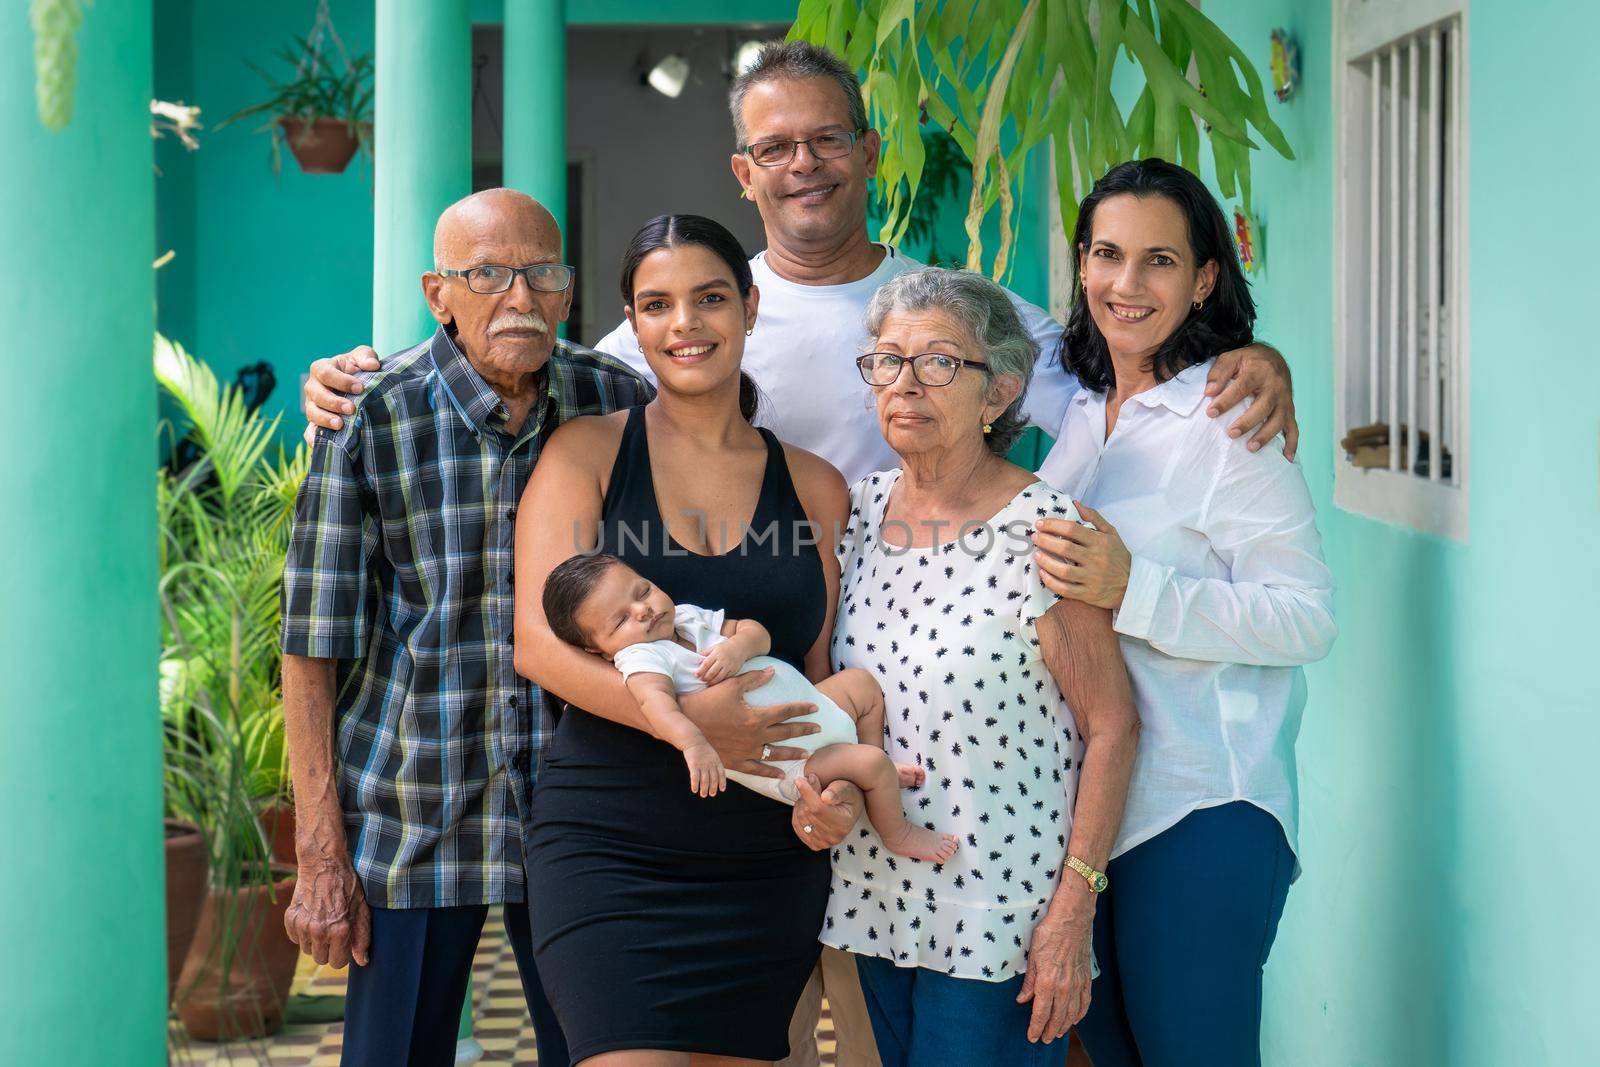 Photo of a group of people. A baby in the arms of a young woman, a man, a woman and an elderly couple